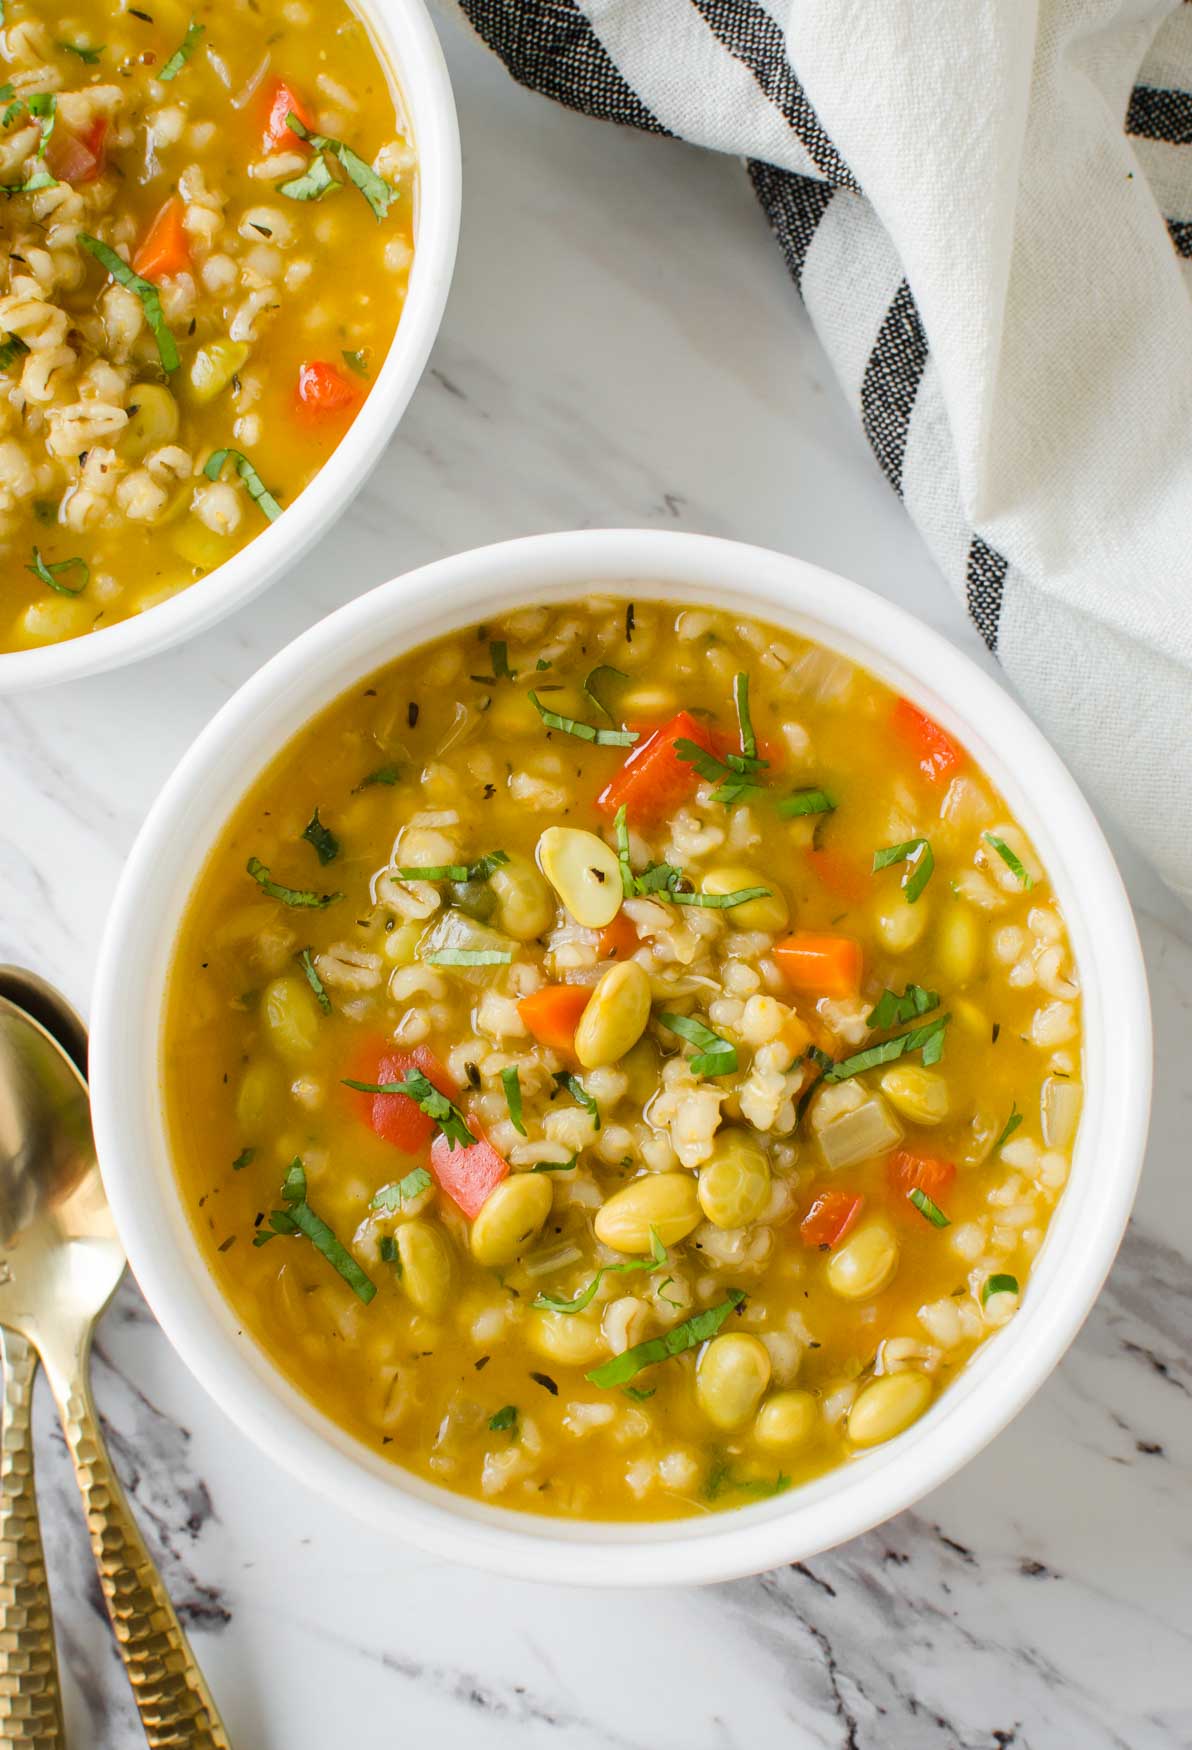 Instant Pot Vegetable Barley Soup - Cook fresh vegetables and whole barley in Instant Pot to prepare this one-pot delicious easy and healthy barley soup in about 30 mins. | #watchwhatueat#barley #barleysoup #vegan #instantpotsoup